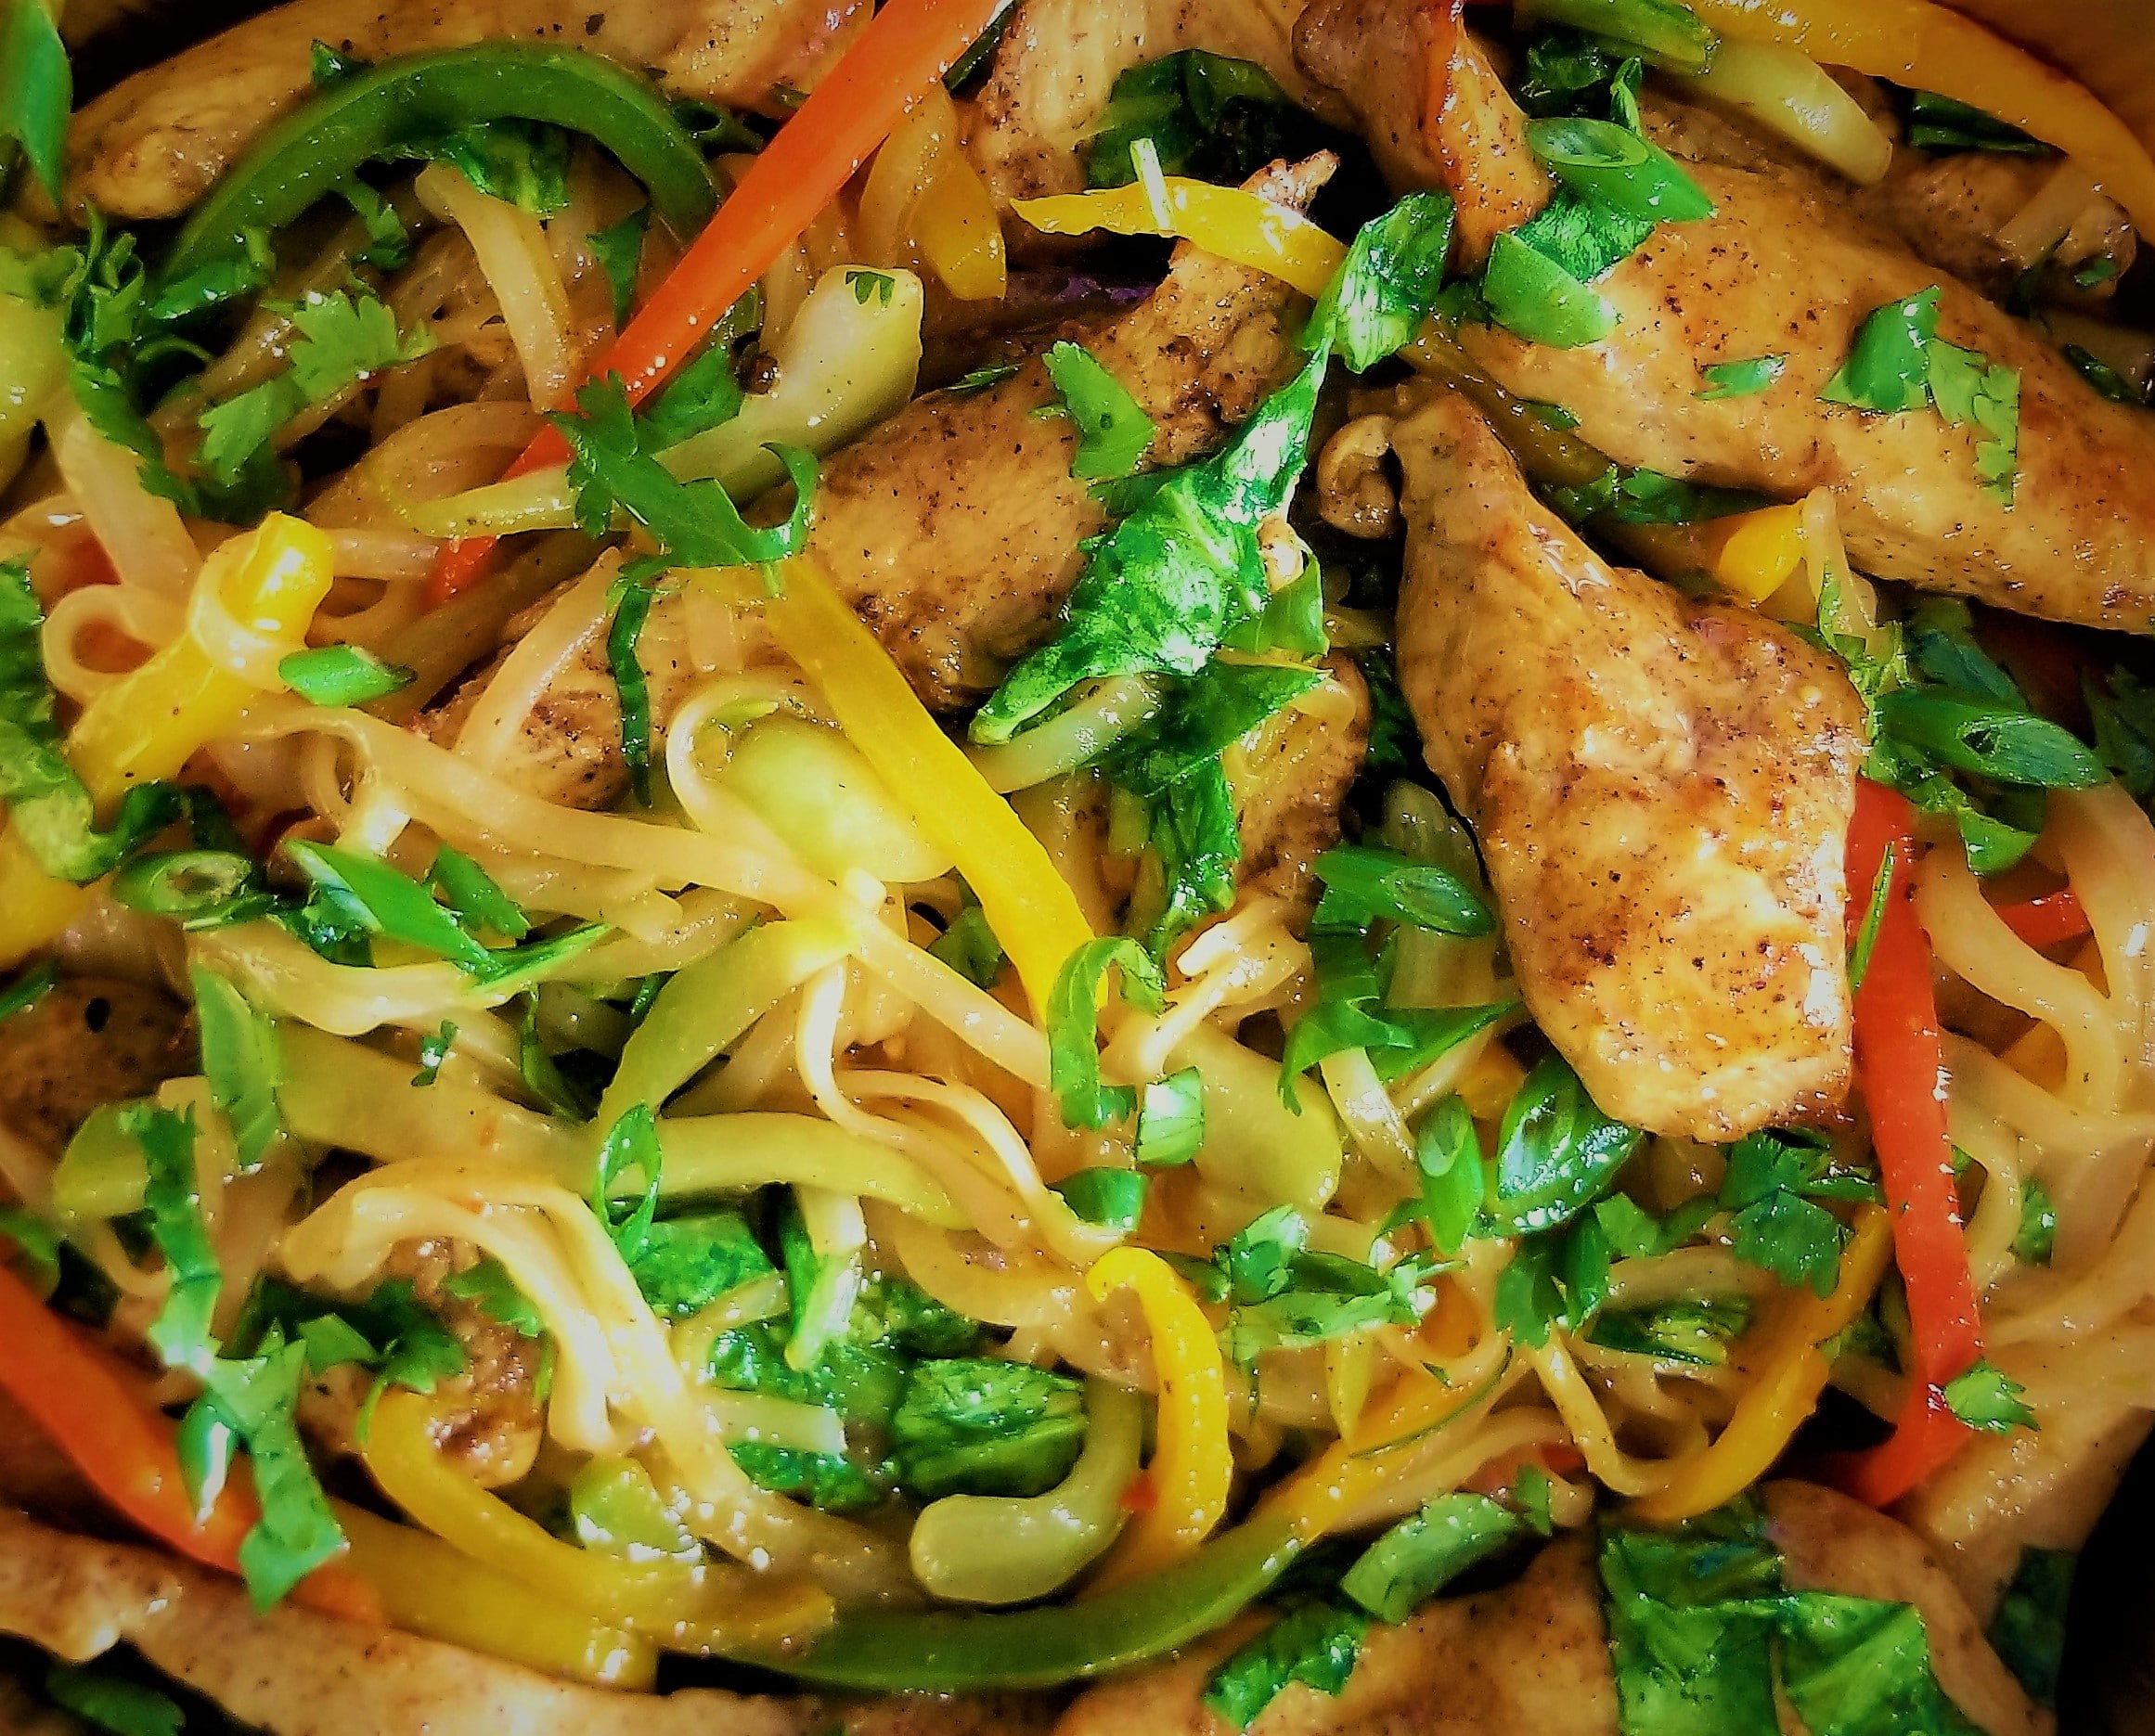 Chicken Stir fry with Vegetables and Rice Noodles